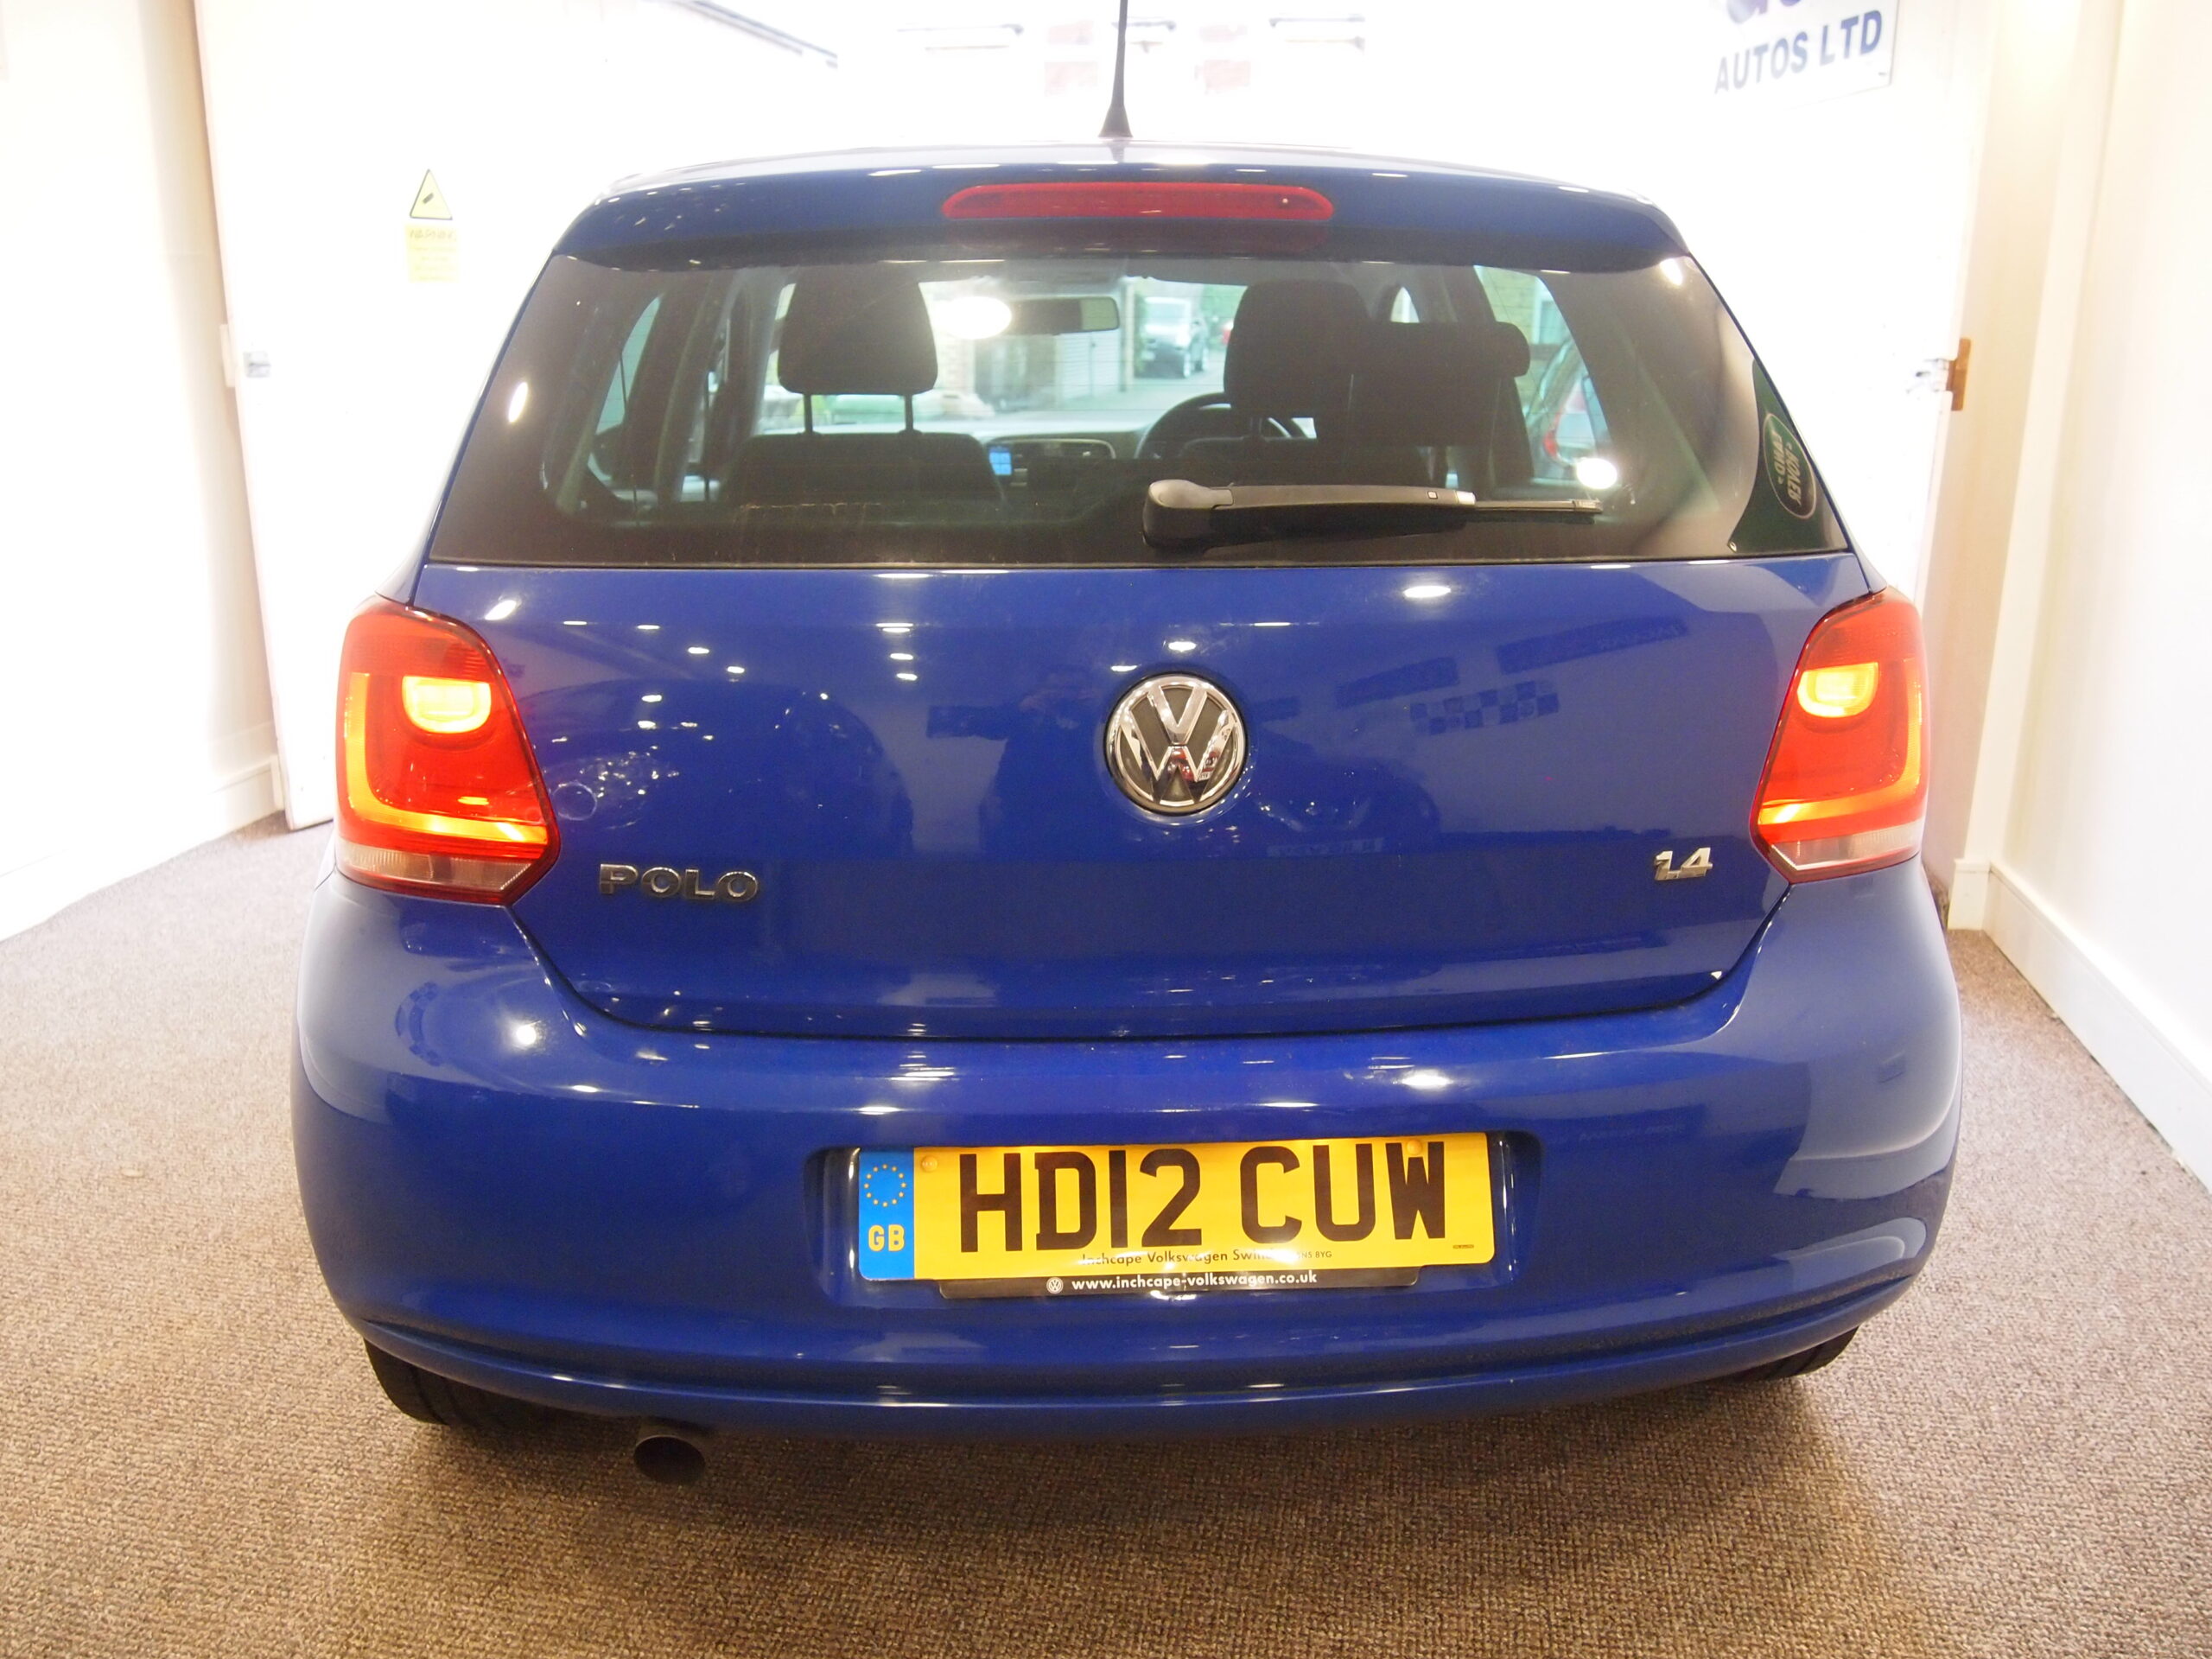 Volkswagen Polo 2012 automatic petrol 1.4 Match DSG 5dr